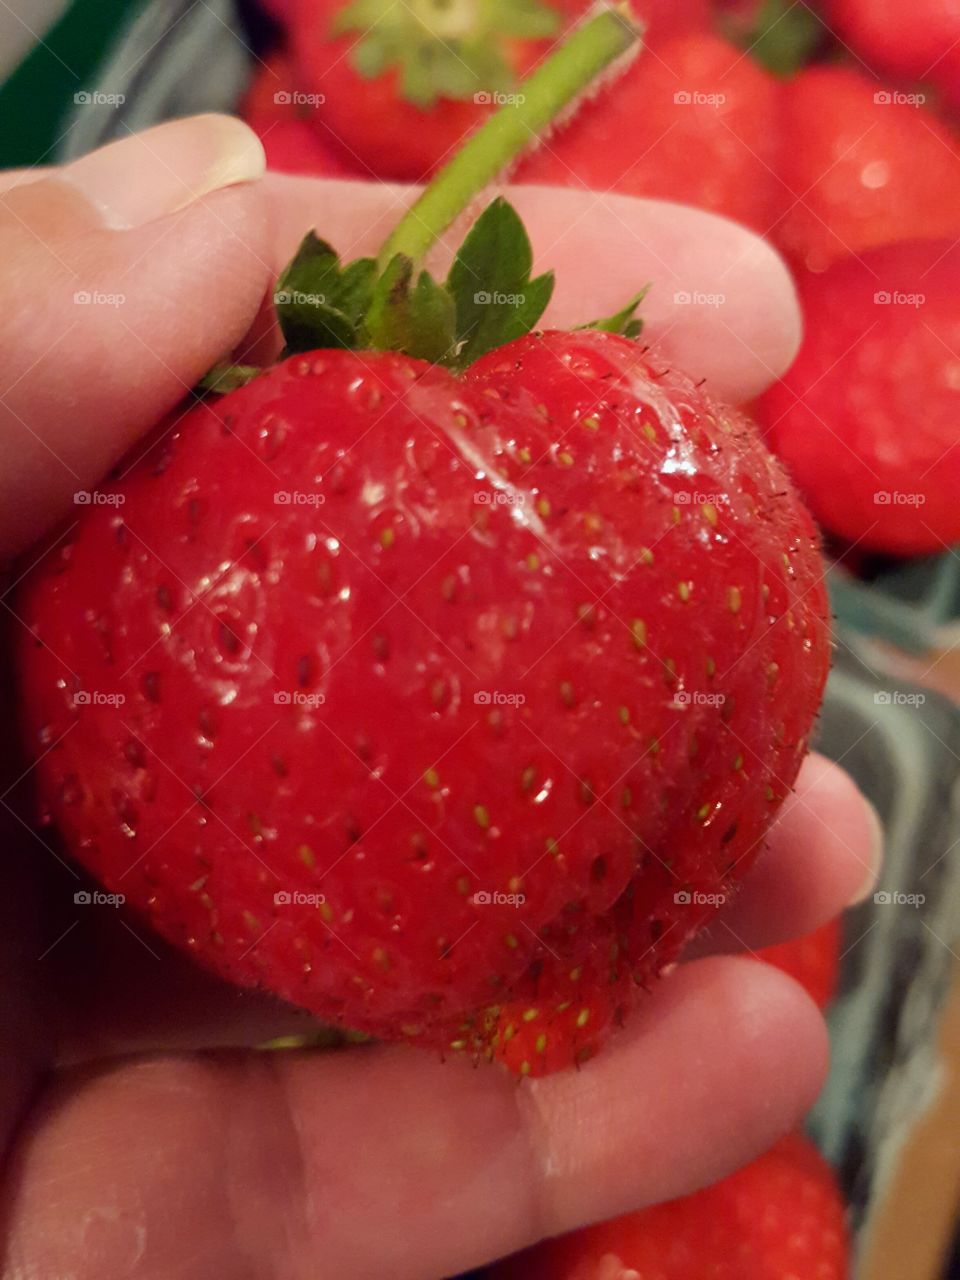 Strawberries from Farmers Market